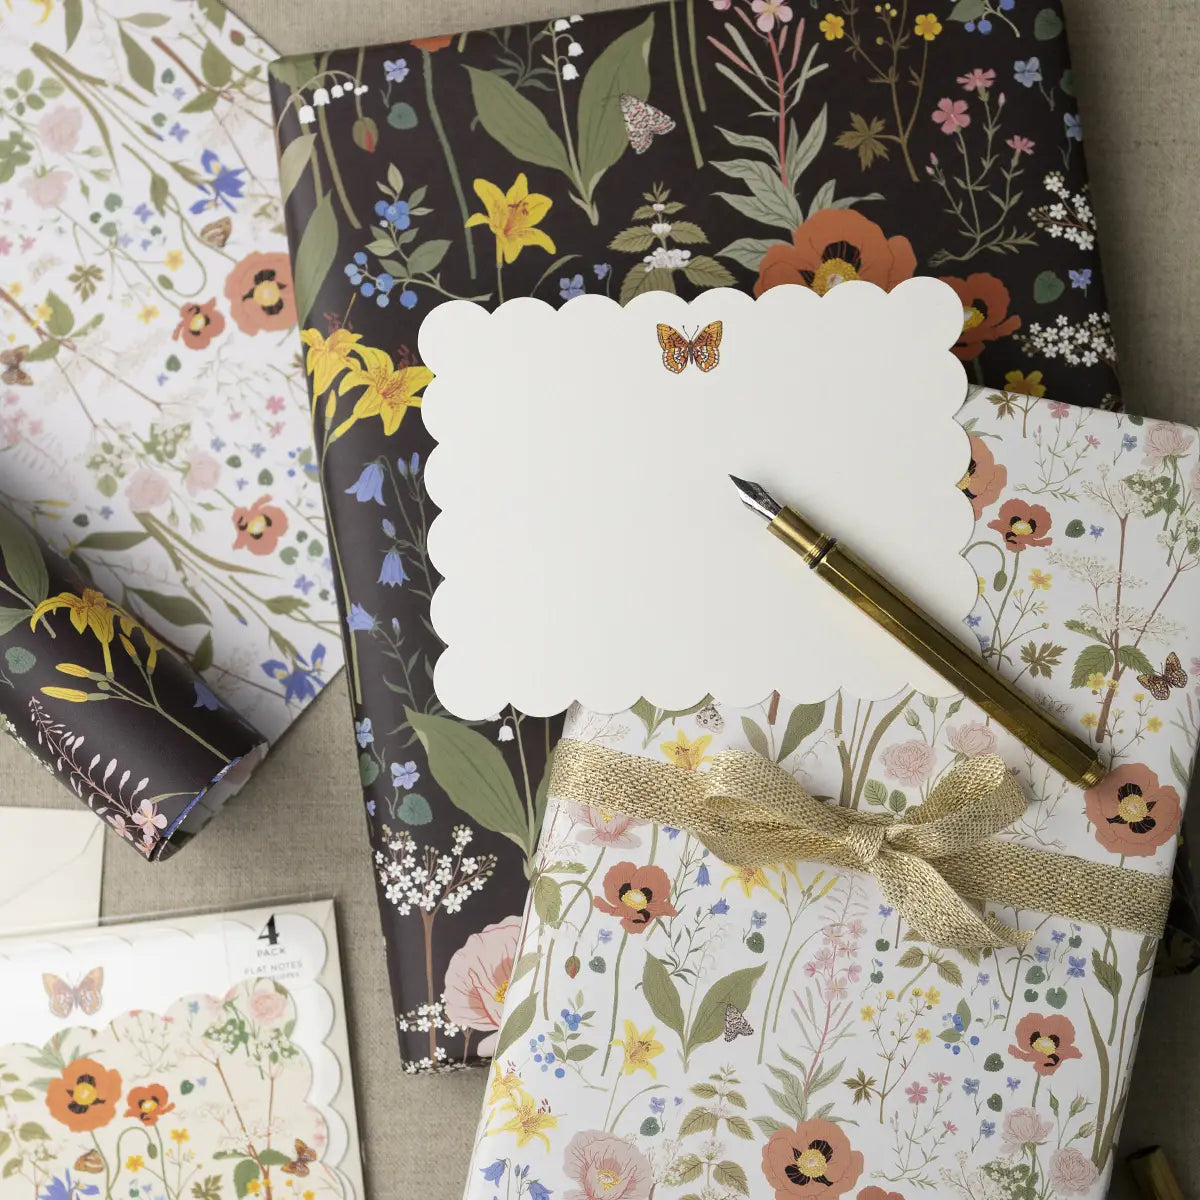 Wild Flowers Note Cards - Set of 4